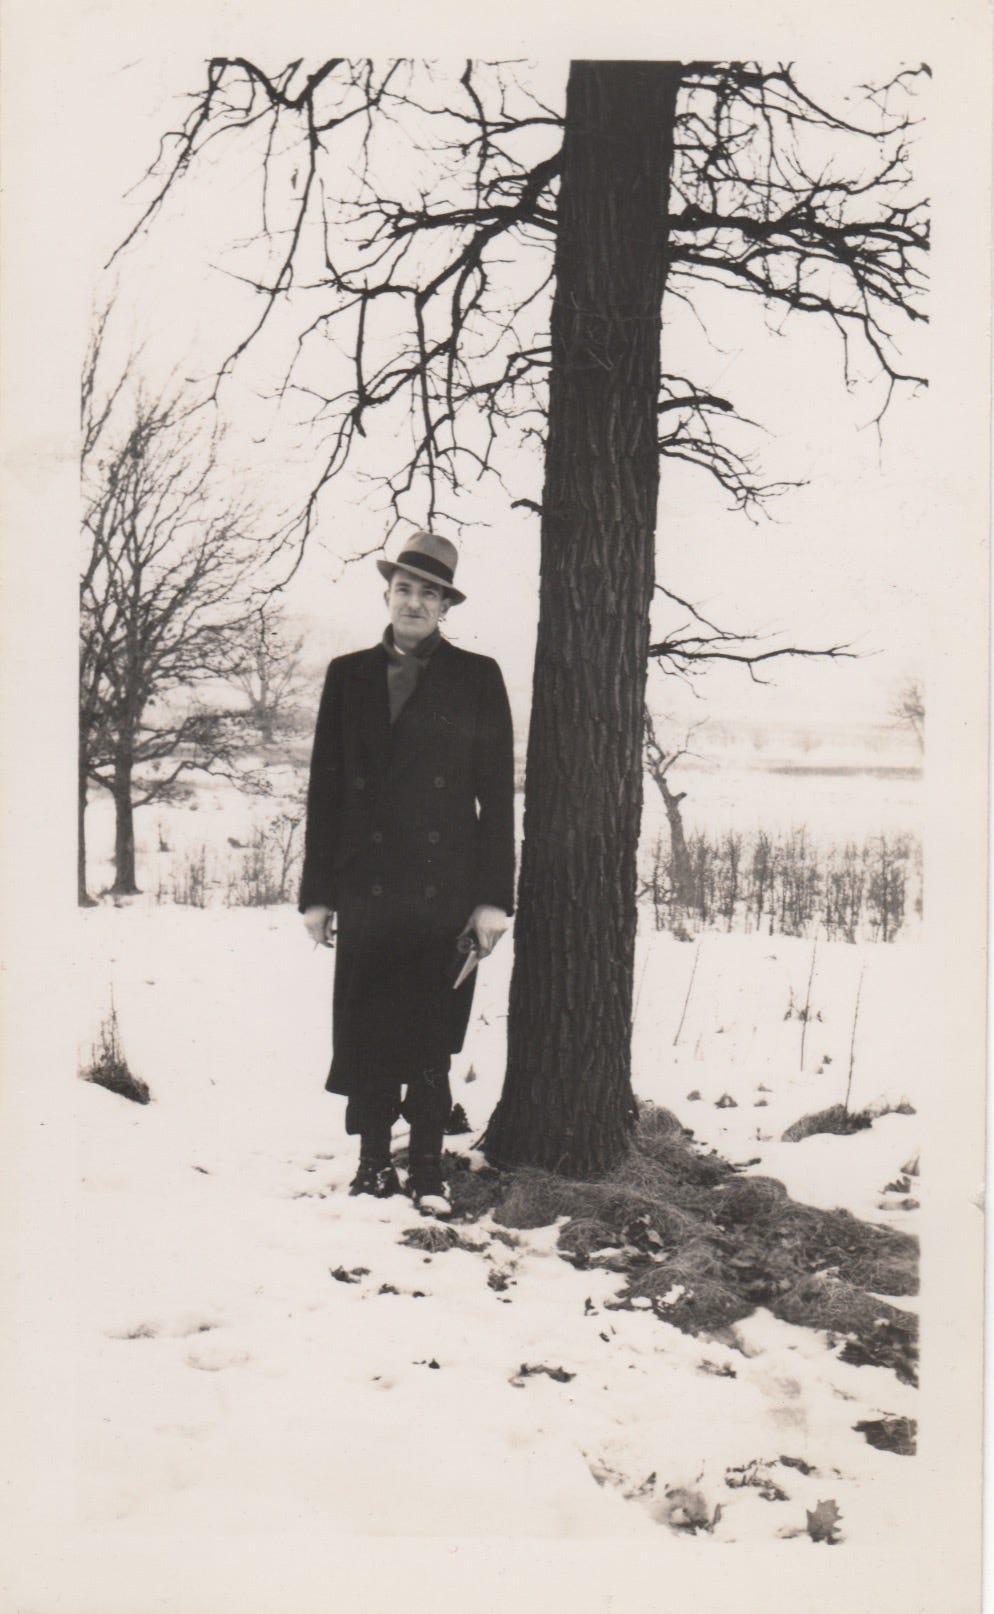 Photo of E Lowell Kammerer standing next to a tree trunk. There is snow on the ground, and the landscape is very wintery.